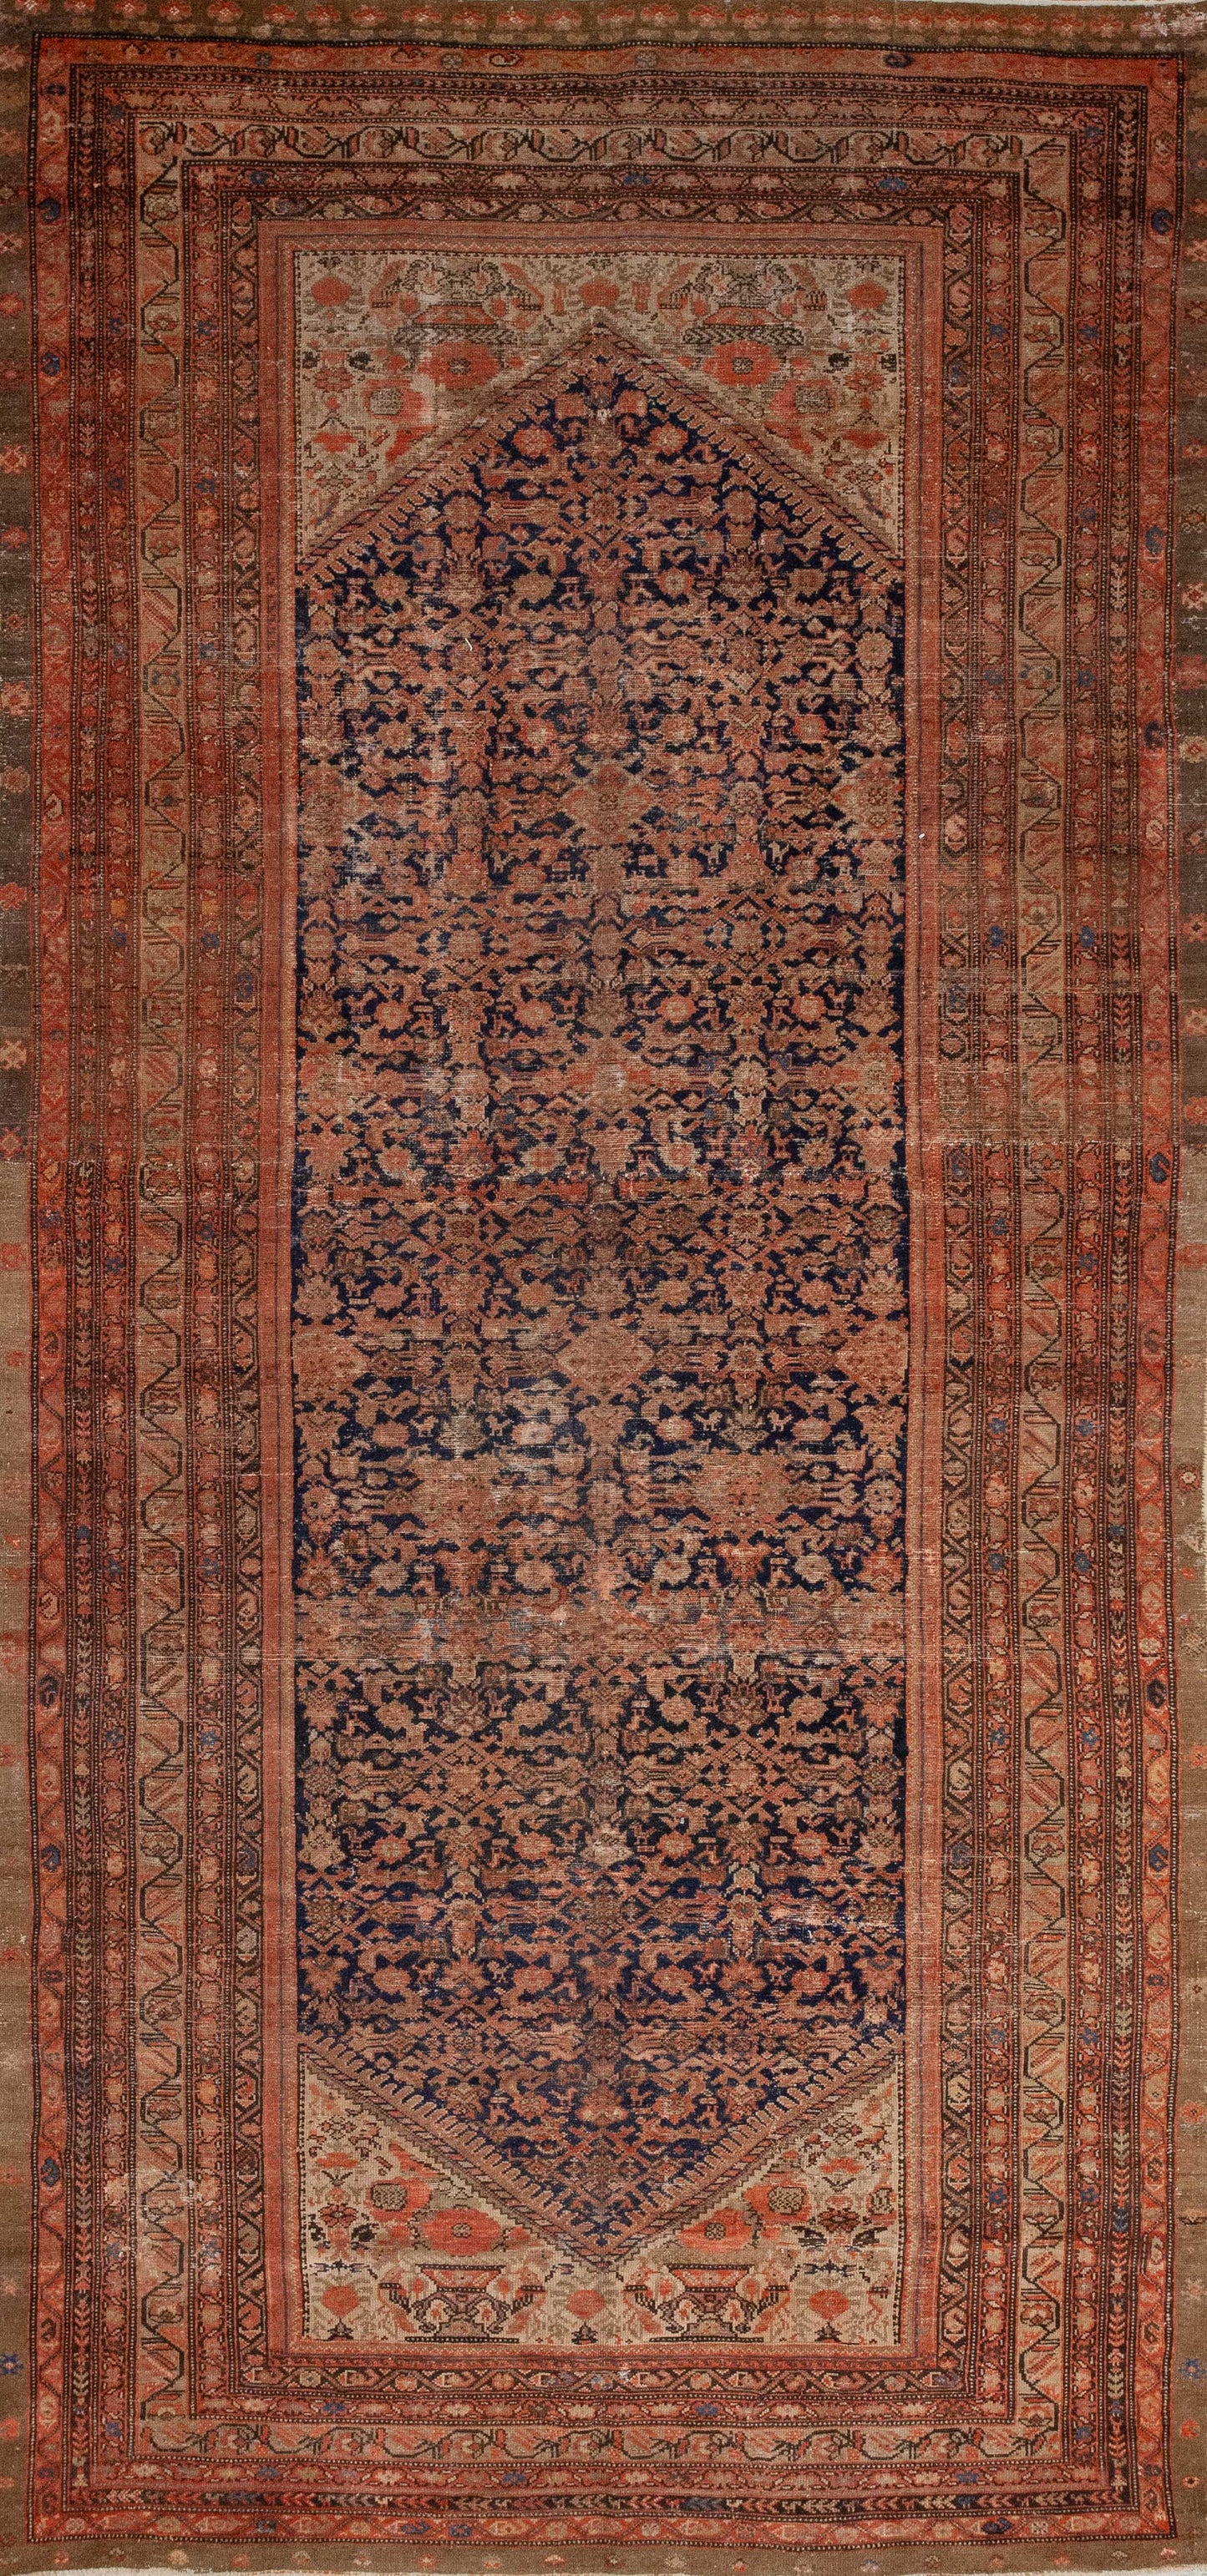 This carpet comes in runner size with multiple borders and a centered design which was woven over a distressed blue background. Also, this rug has the antique style and a traditional flower's pattern. 